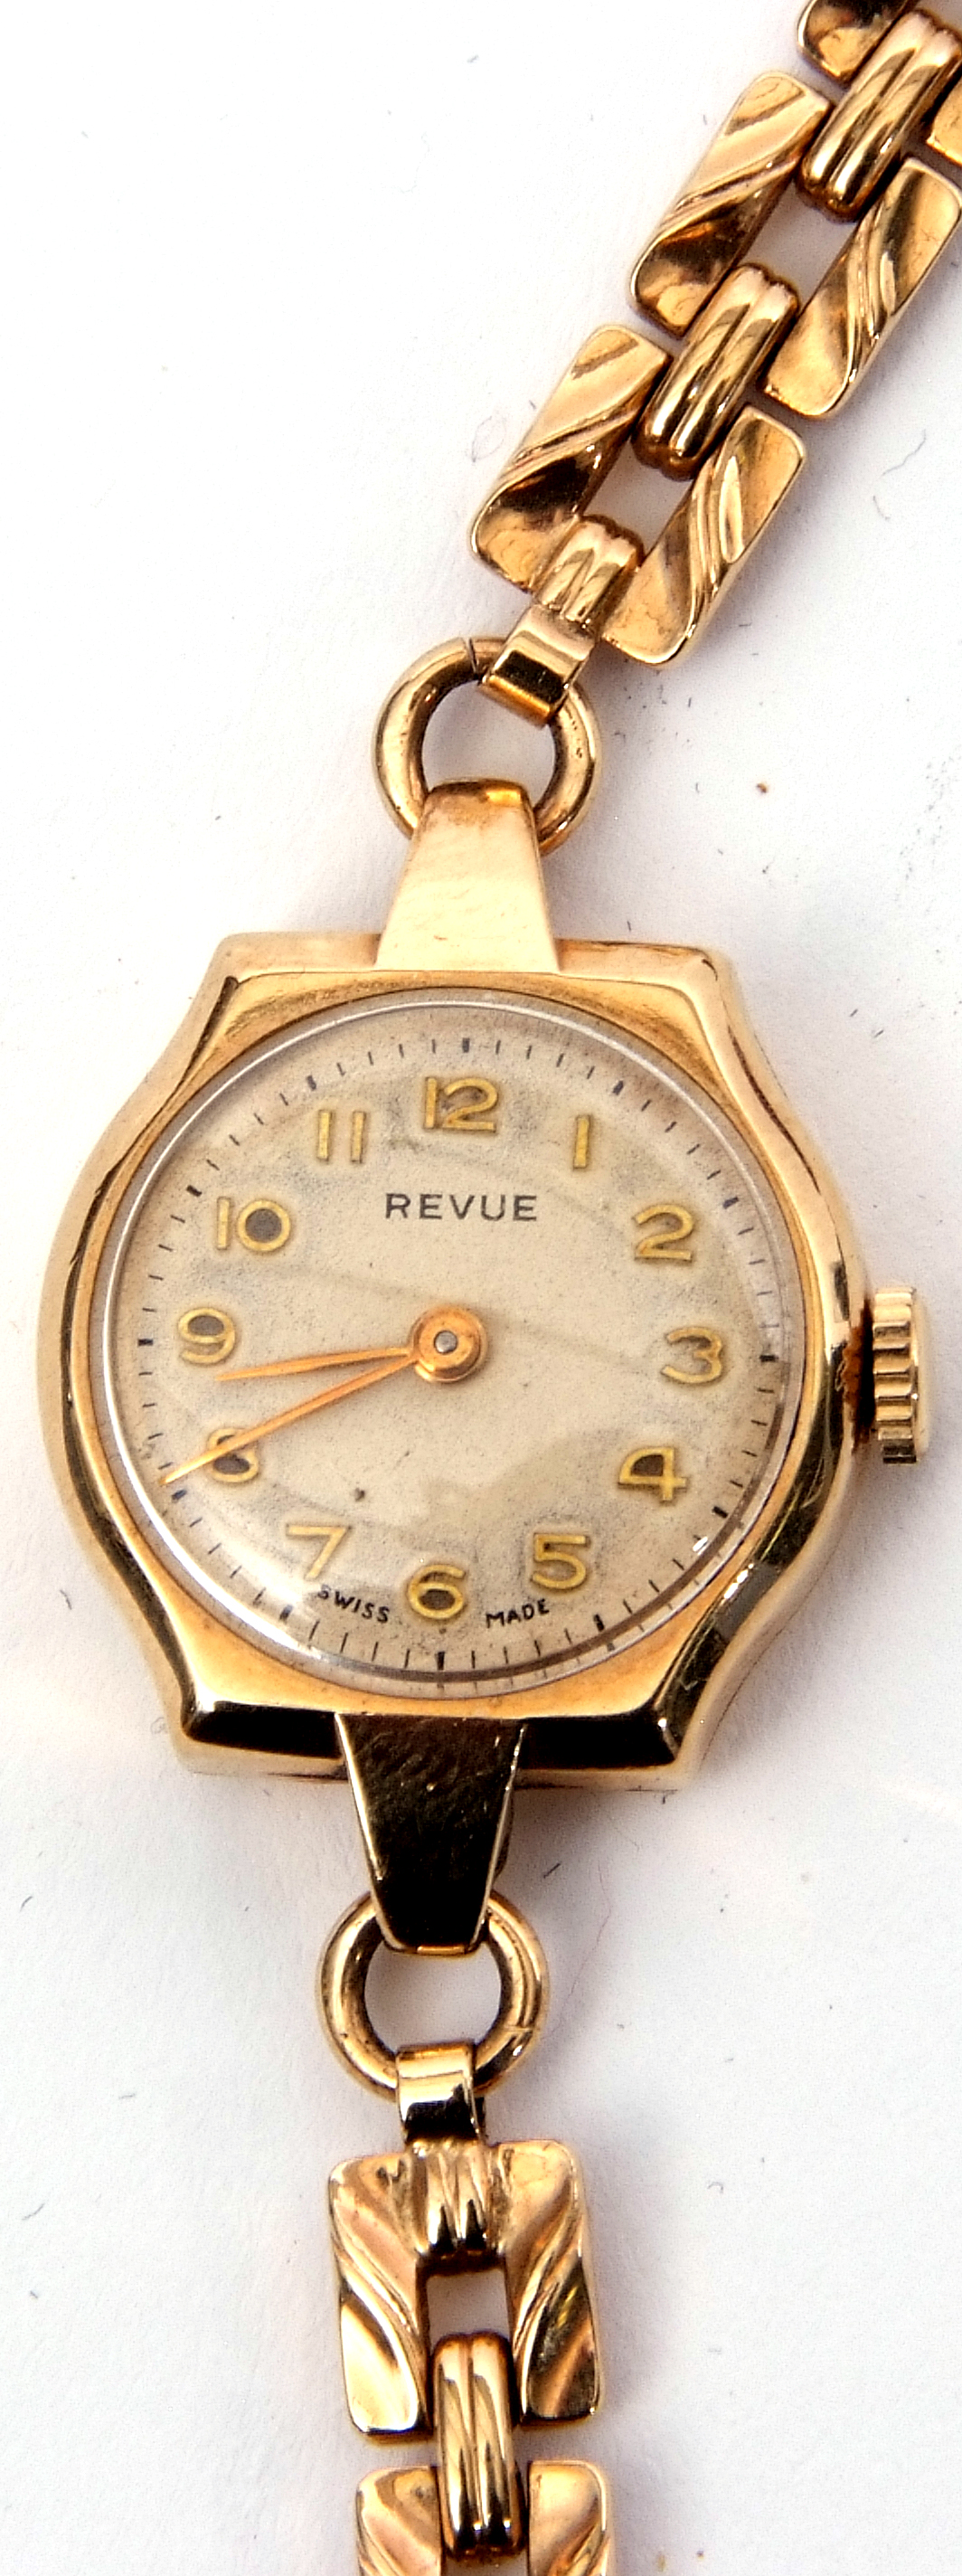 Ladies 9ct gold cased Revue wrist watch with gold hands to a cream coloured dial with raised gold - Image 2 of 4